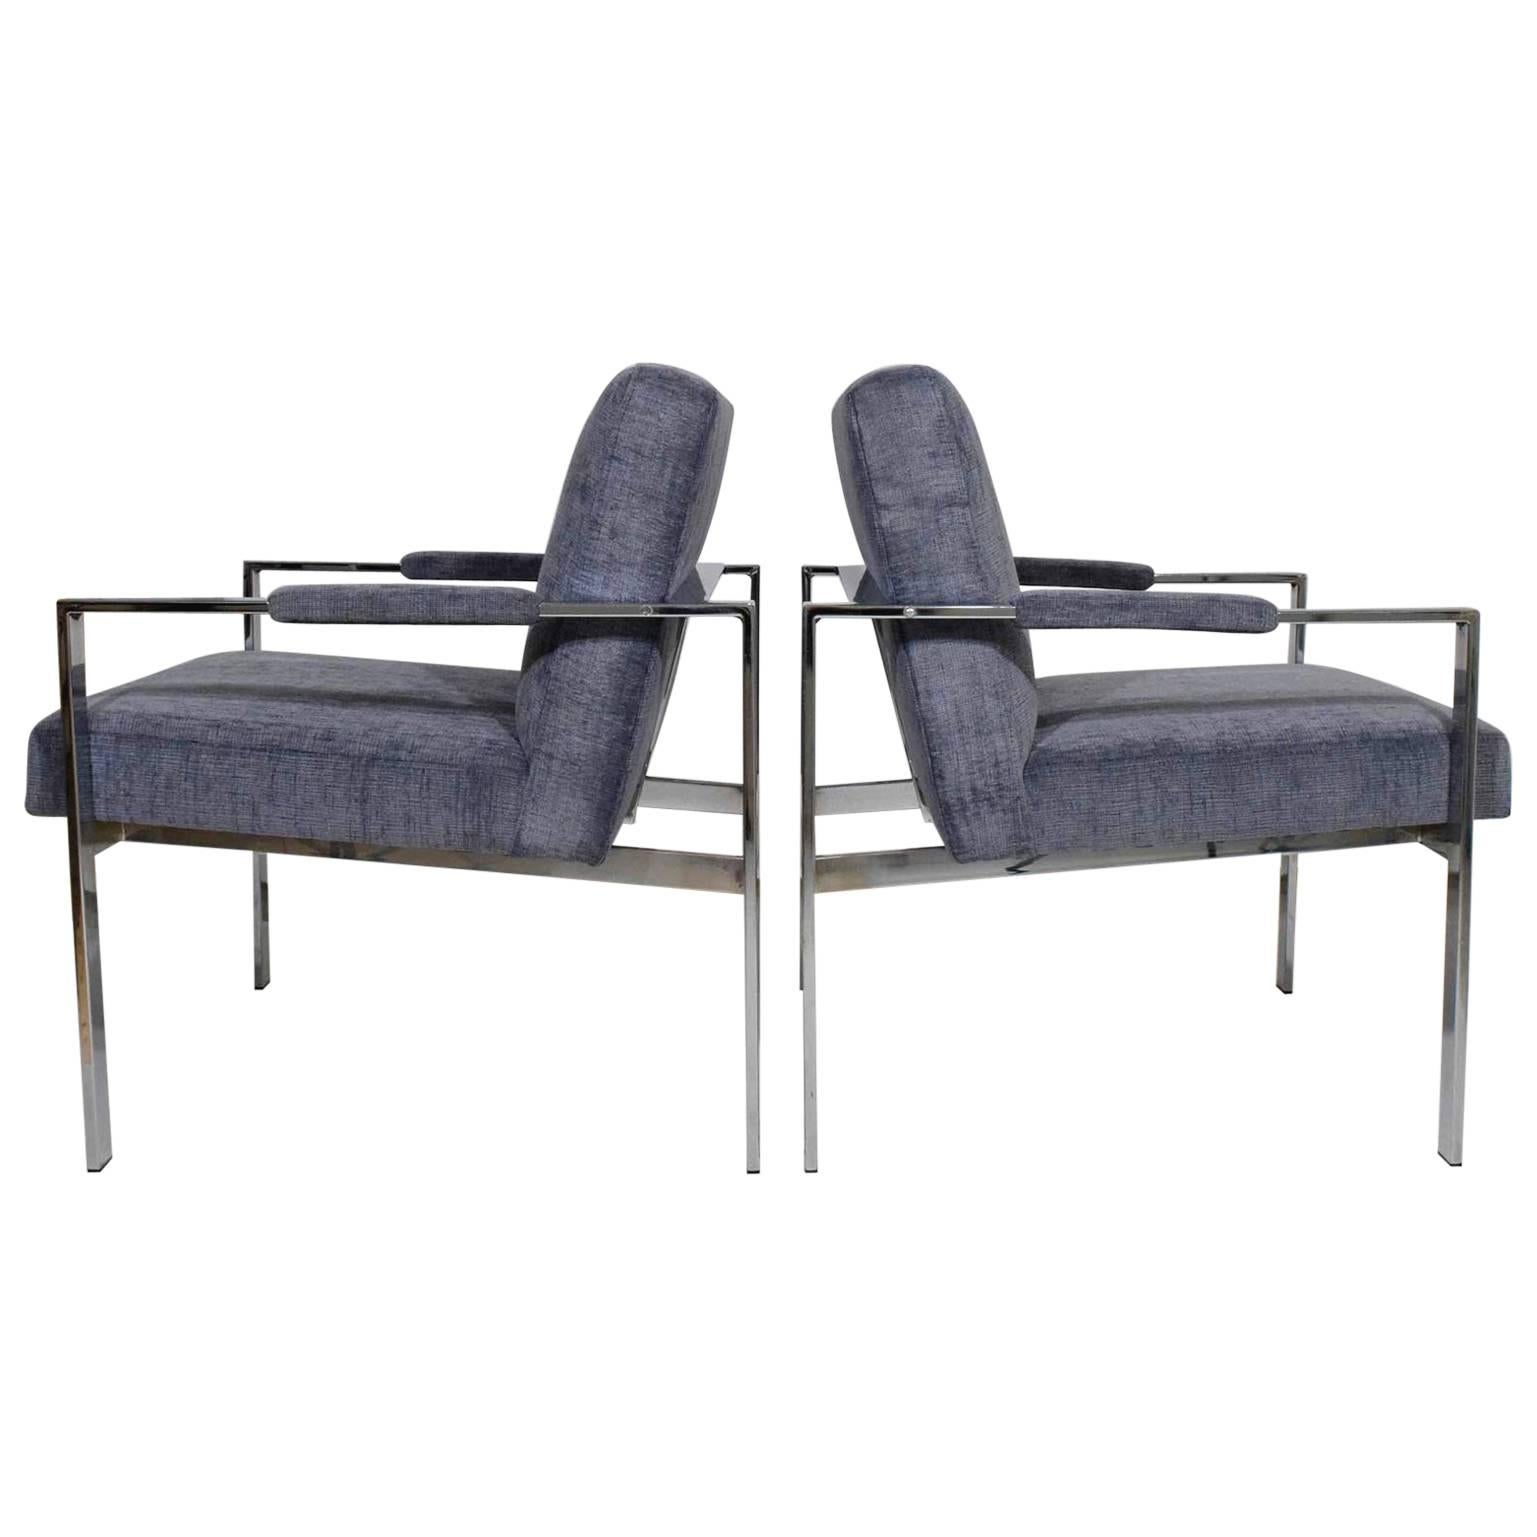 Pair of Milo Baughman Lounge Chairs in Holly Hunt Great Plains